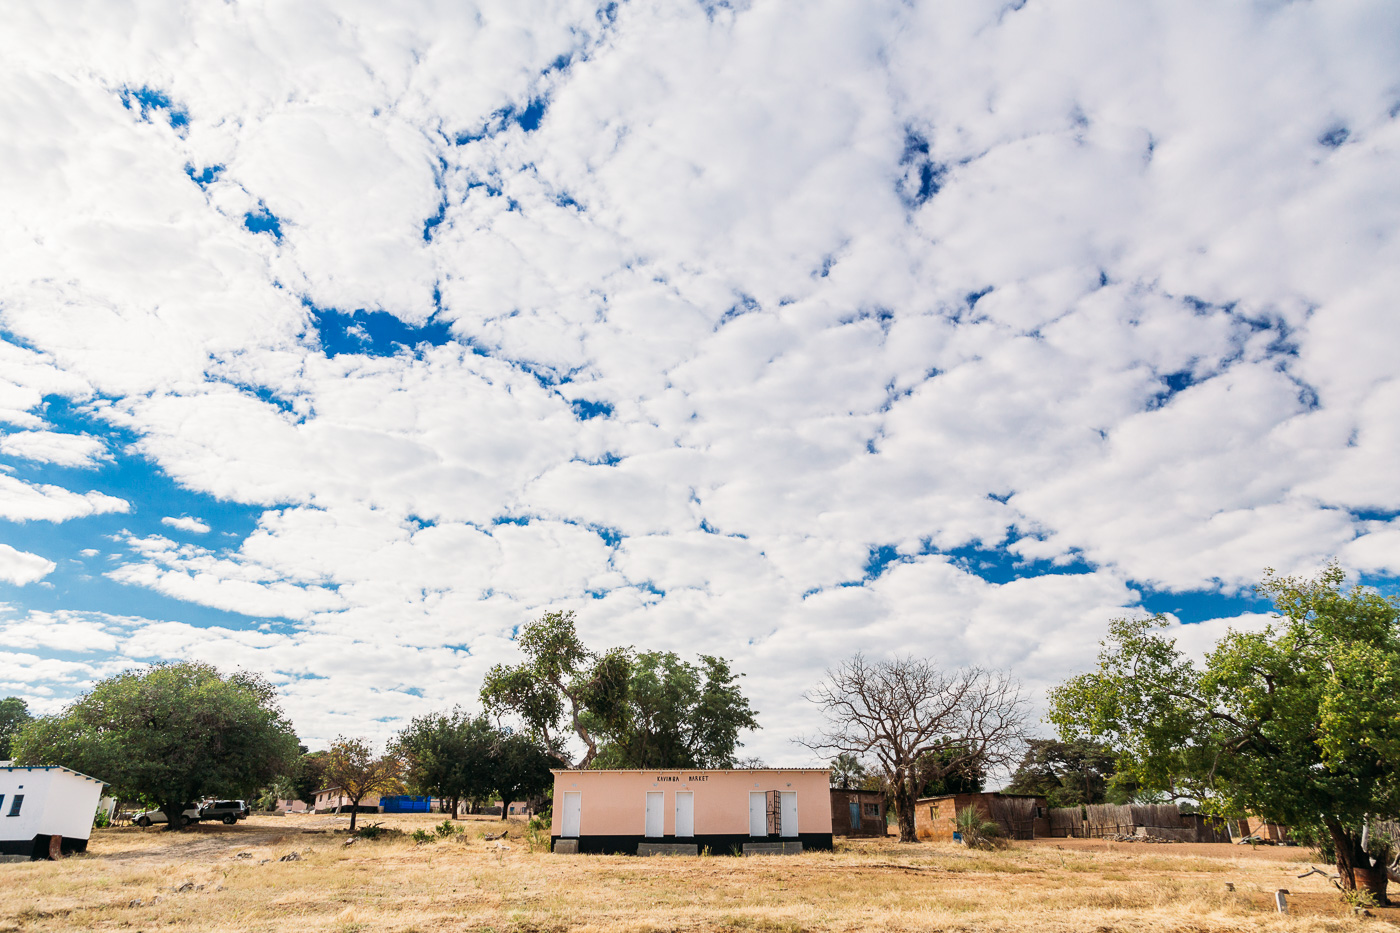 Clouds for miles in that Botswana sky